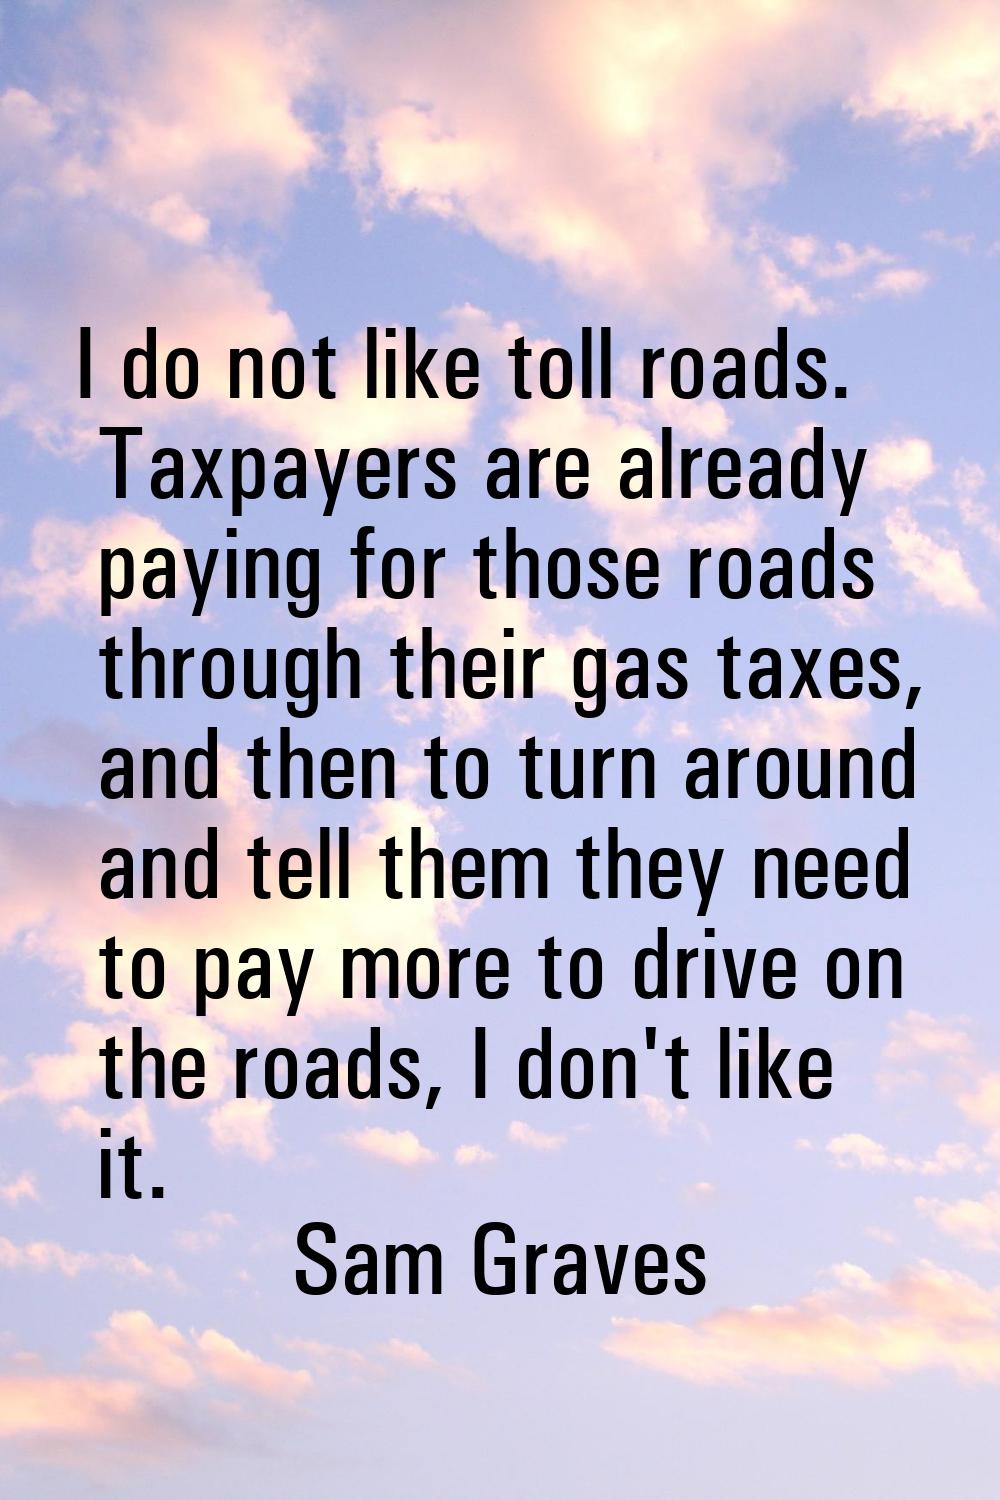 I do not like toll roads. Taxpayers are already paying for those roads through their gas taxes, and